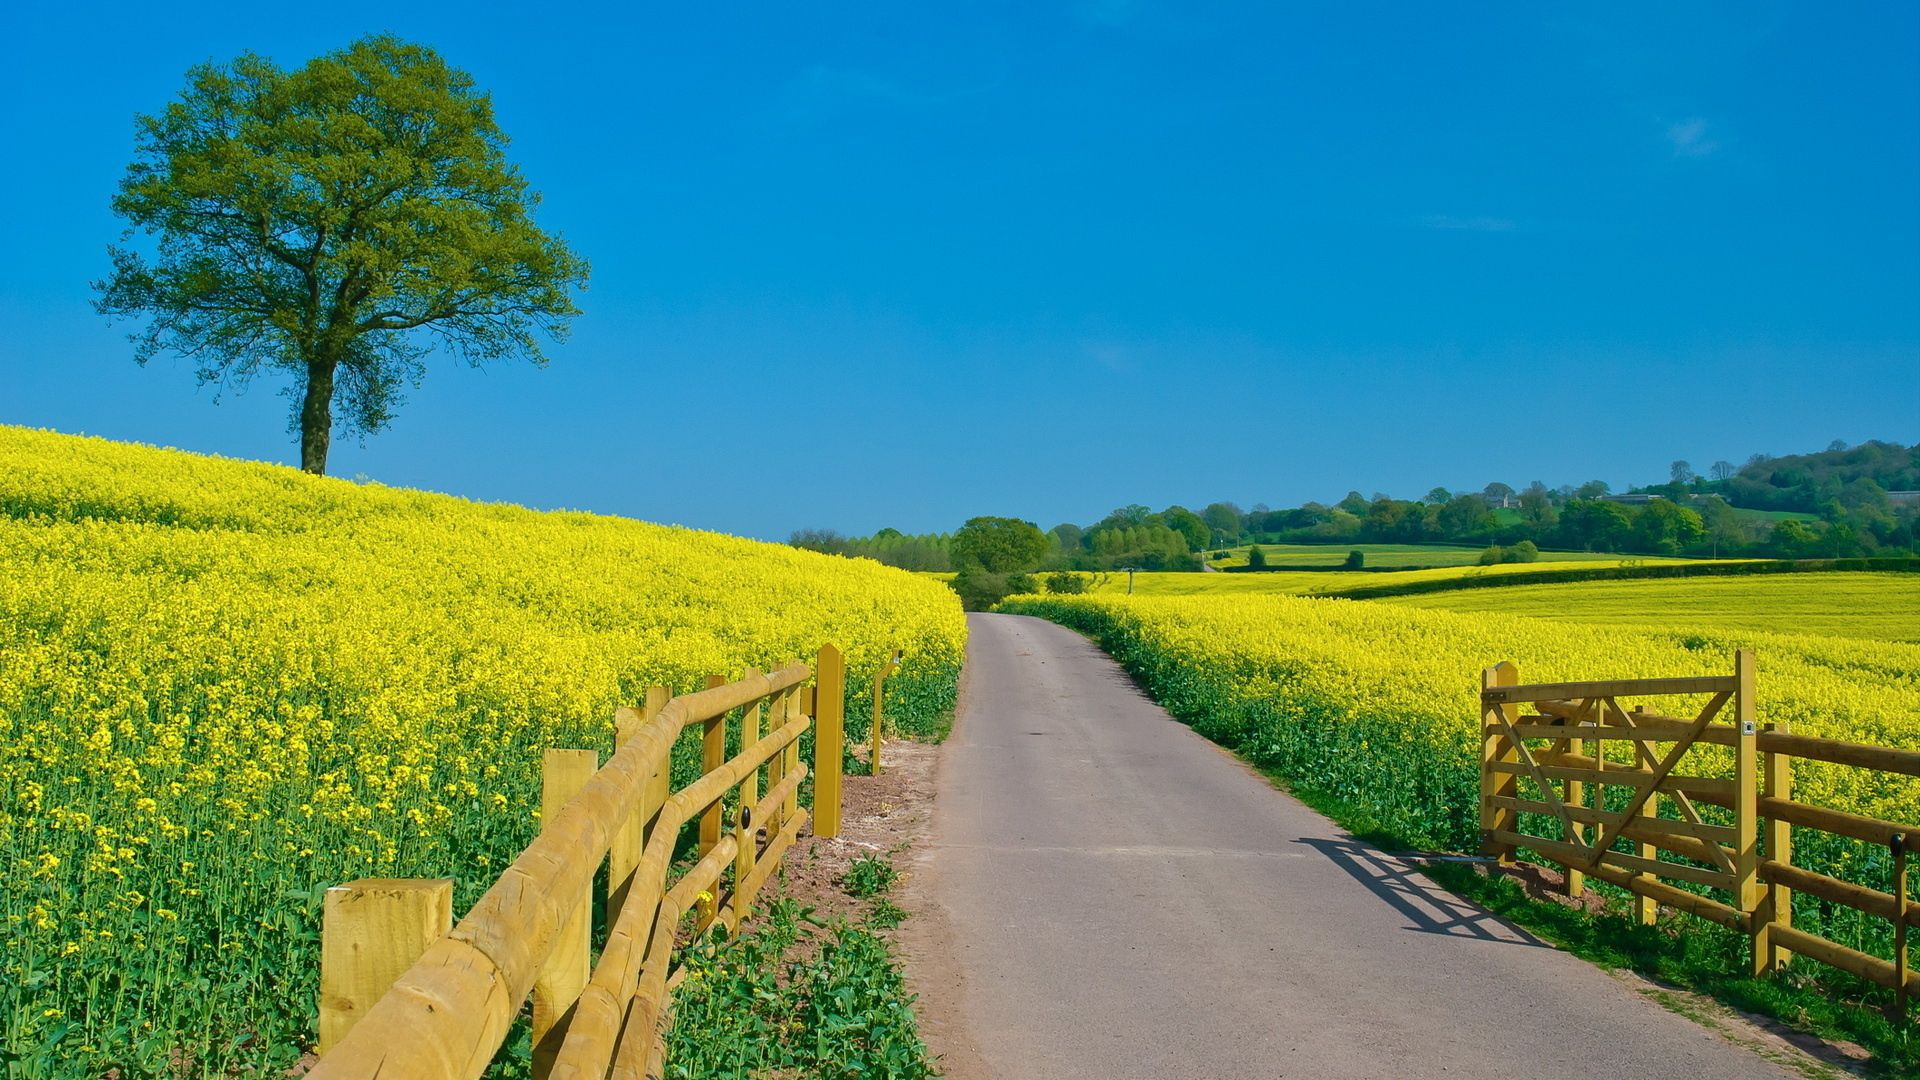 wallpapers road, summer, flowers, open spaces, expanse, slopes, yellow, nature, fencing, enclosure, day